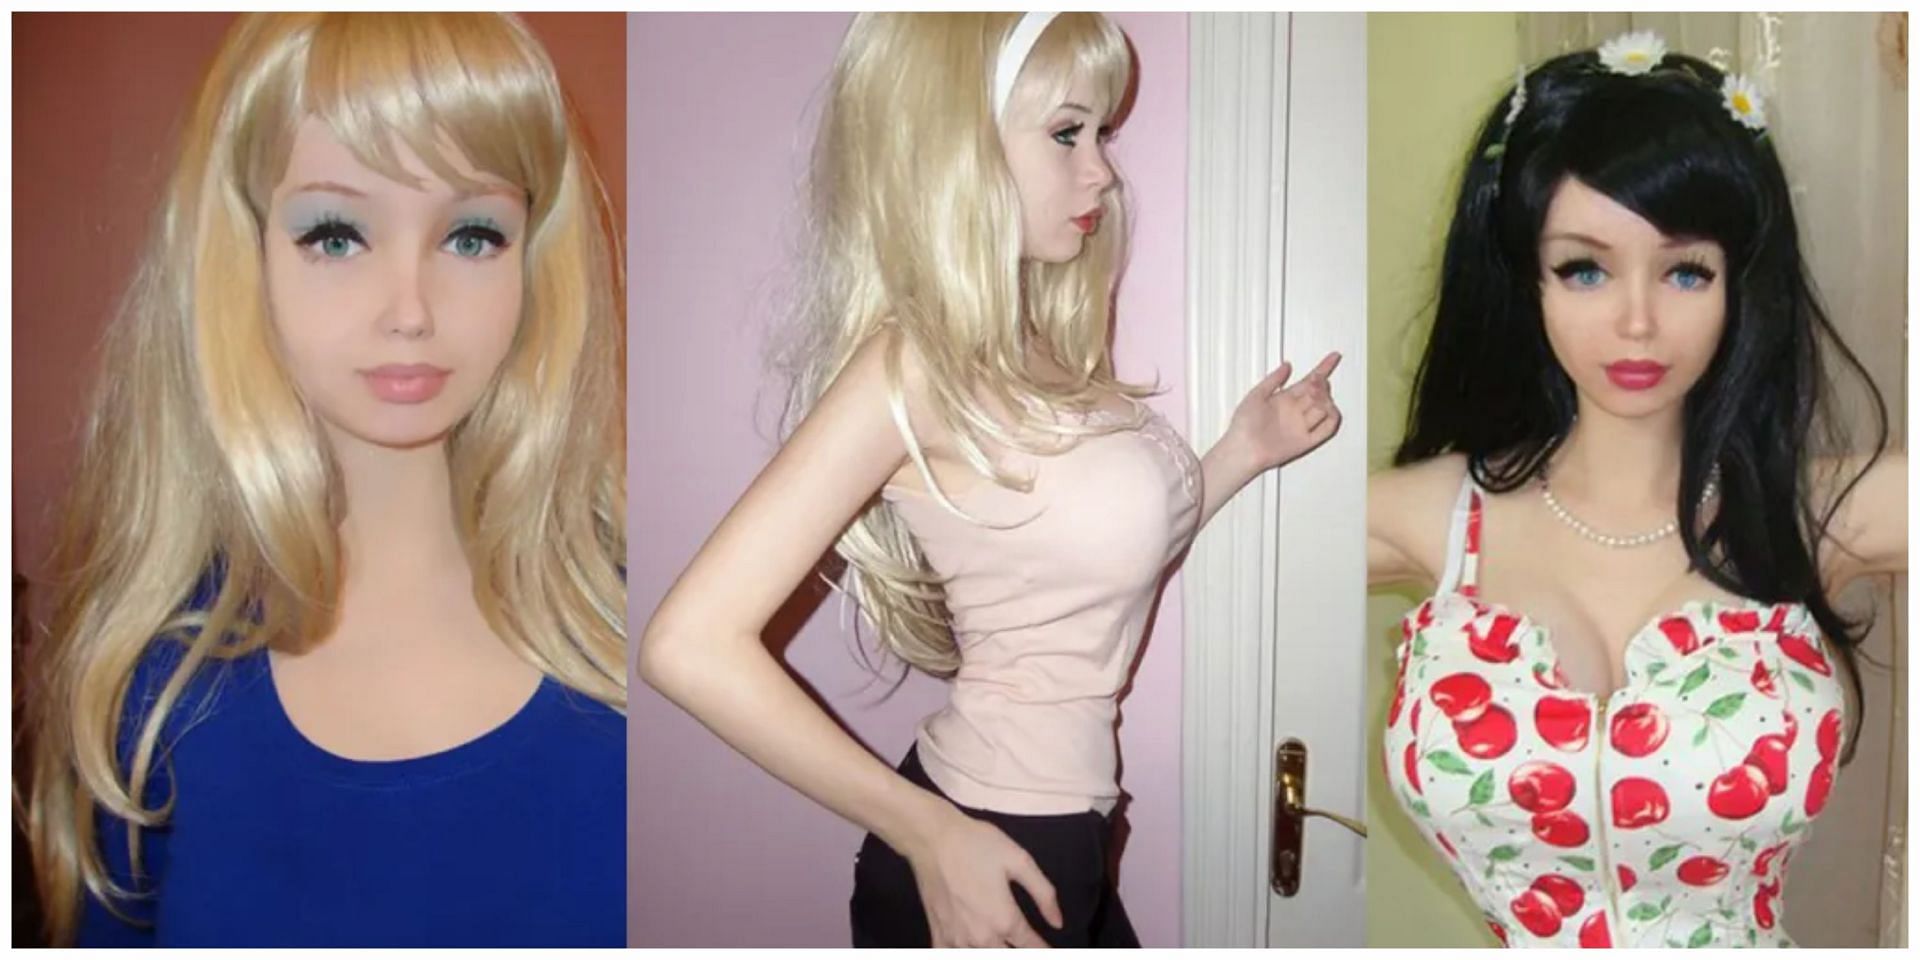 Lolita Richi claims to be a natural real-life Barbie (Image via Pinterest)